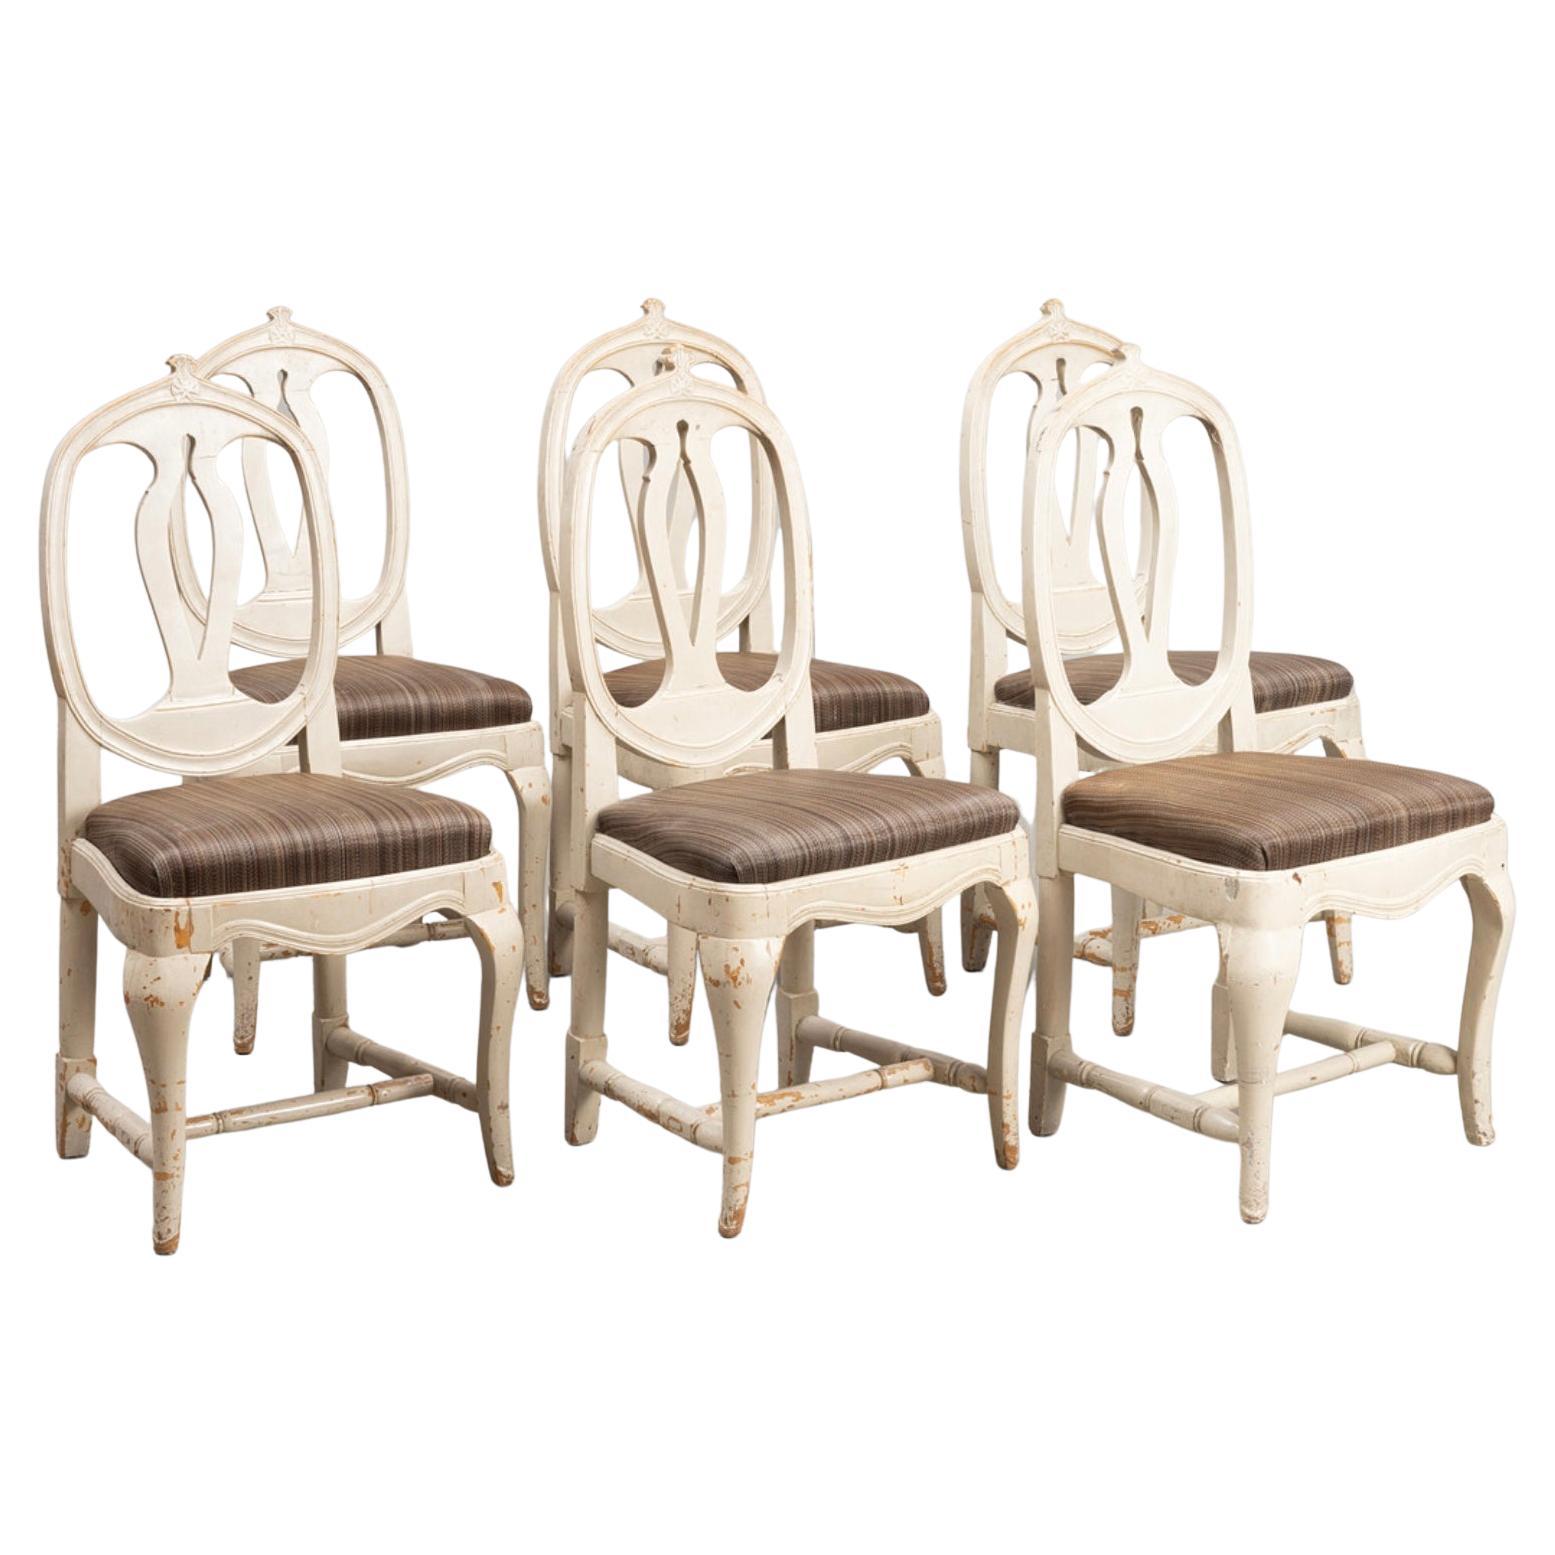 Set of 6 Circa 1800s Swedish Painted Oak Provincial Gustavian Dining Chairs 